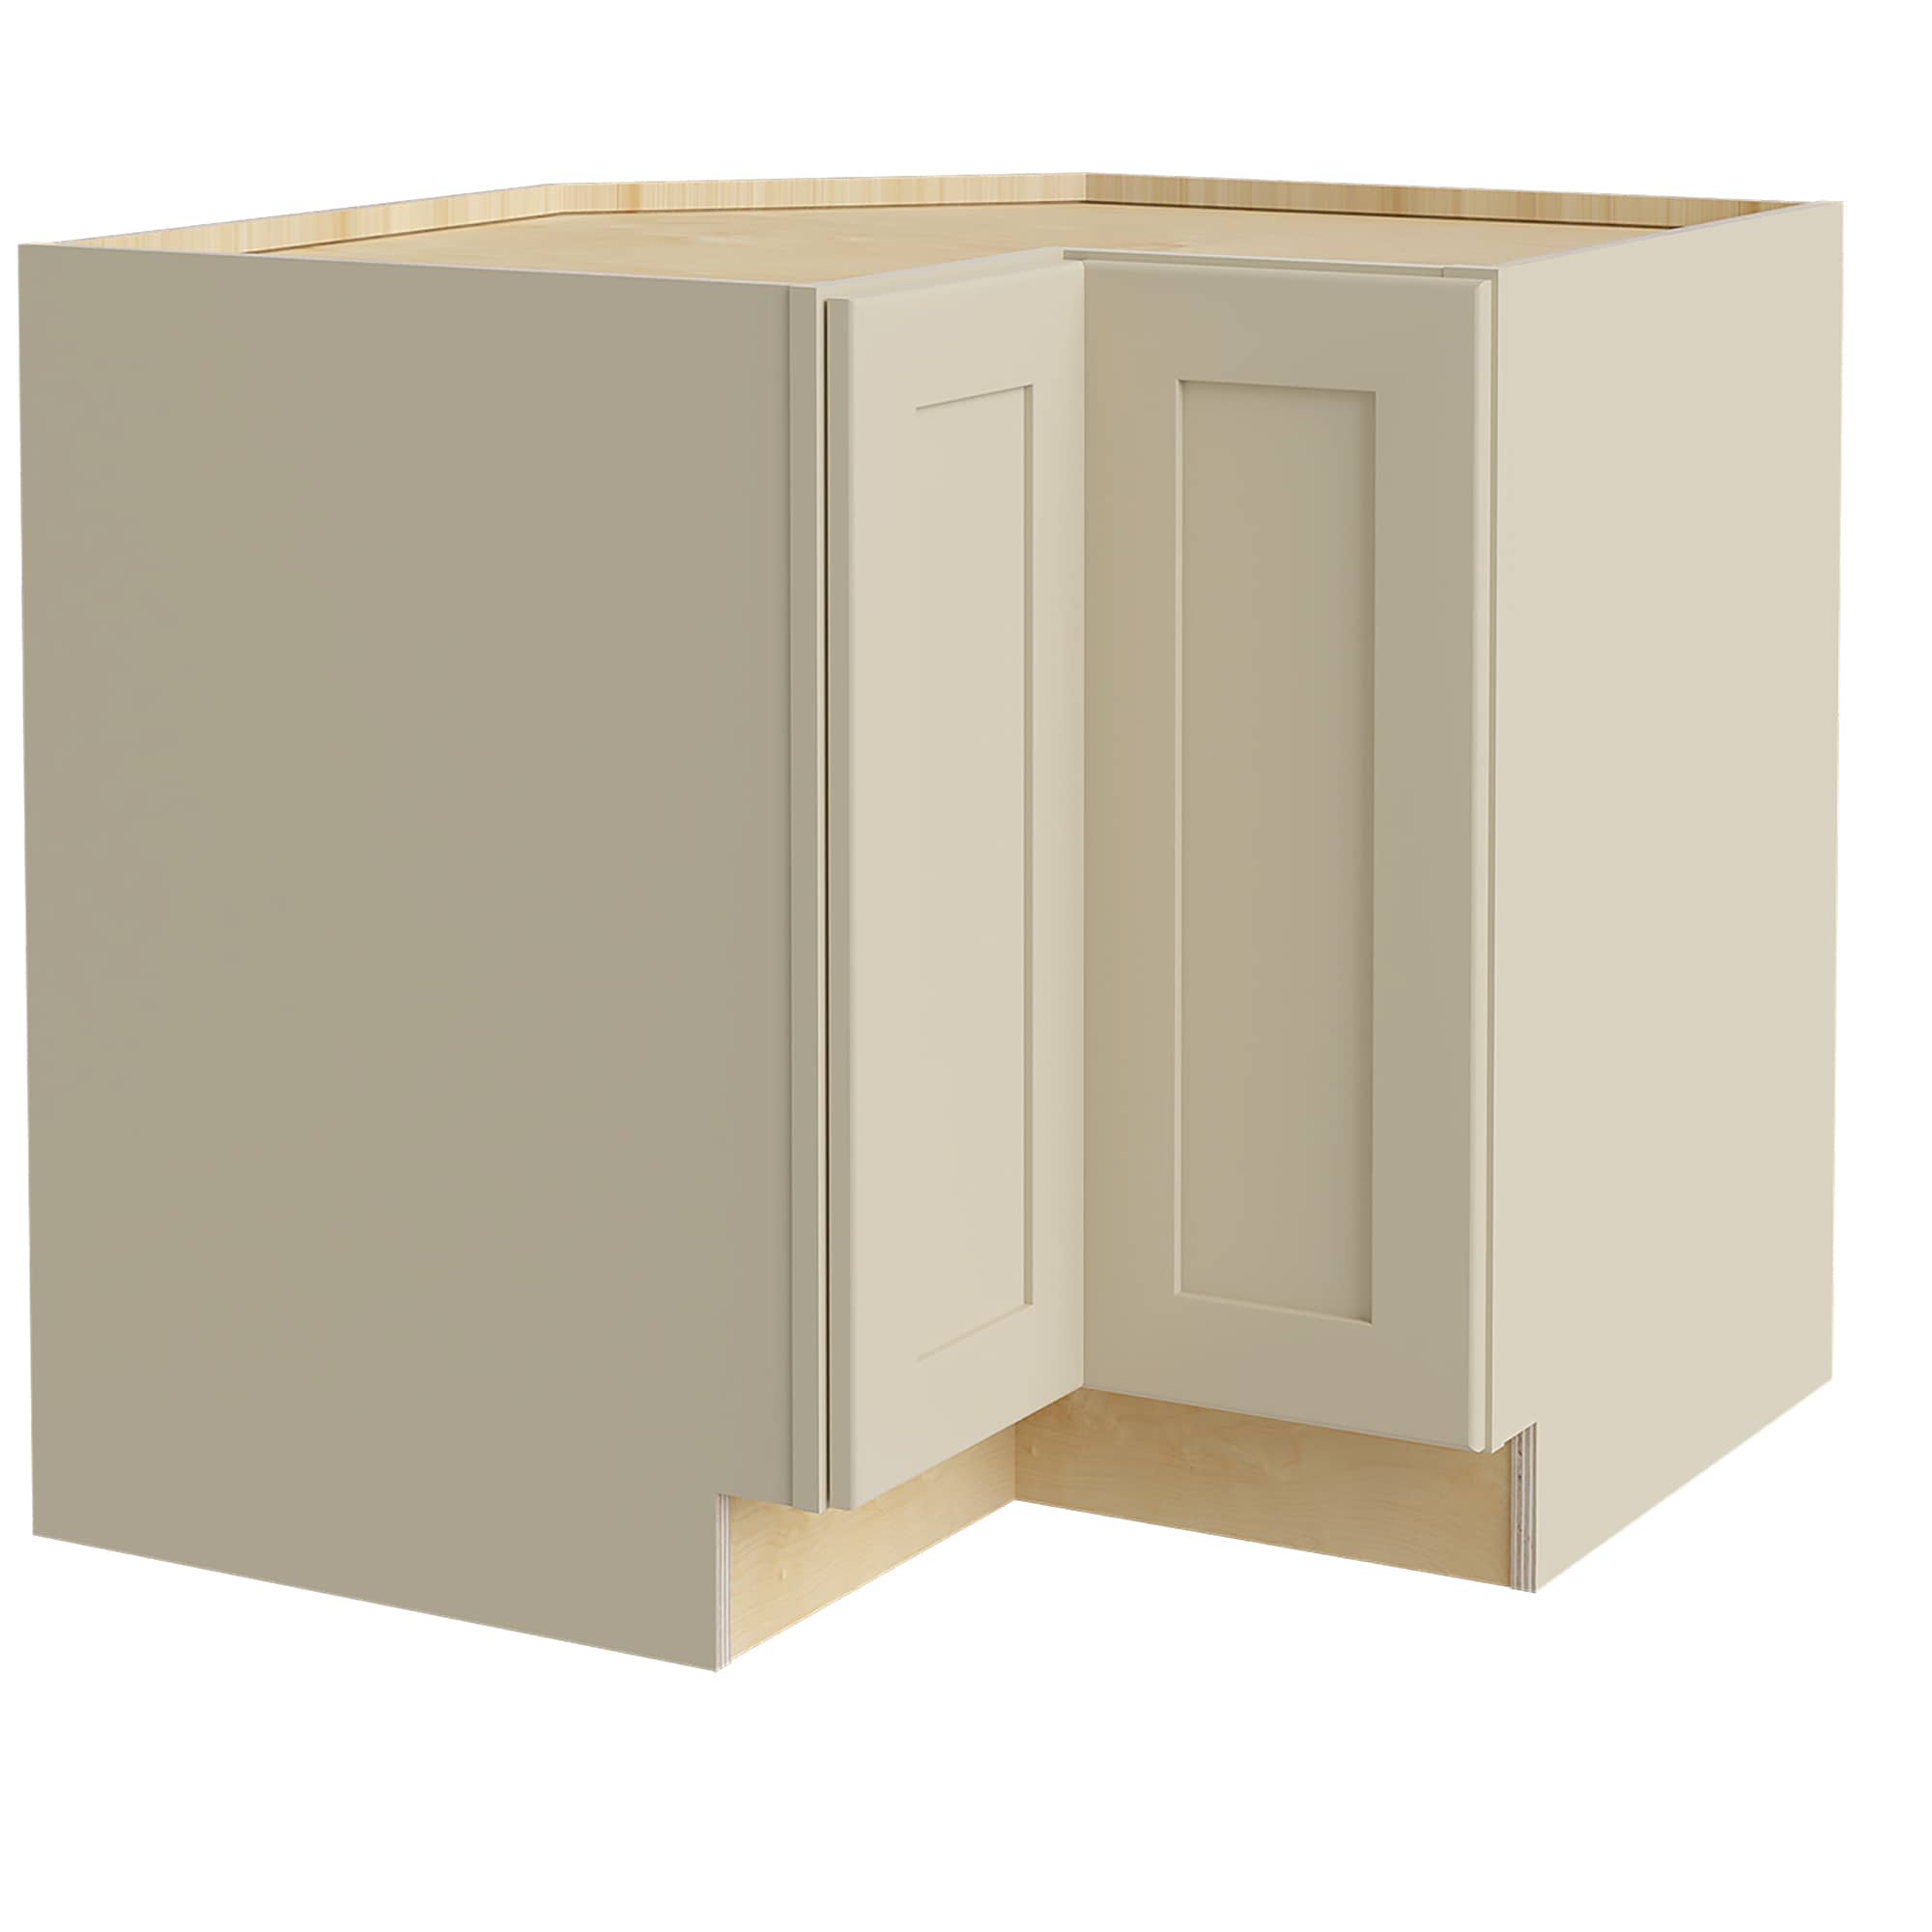 Luxxe Cabinetry 33-in W x 34.5-in H x 24-in D Norfolk Blended Cream Painted Corner Base Fully Assembled Semi-custom Cabinet in Off-White | EZR33R-NBC